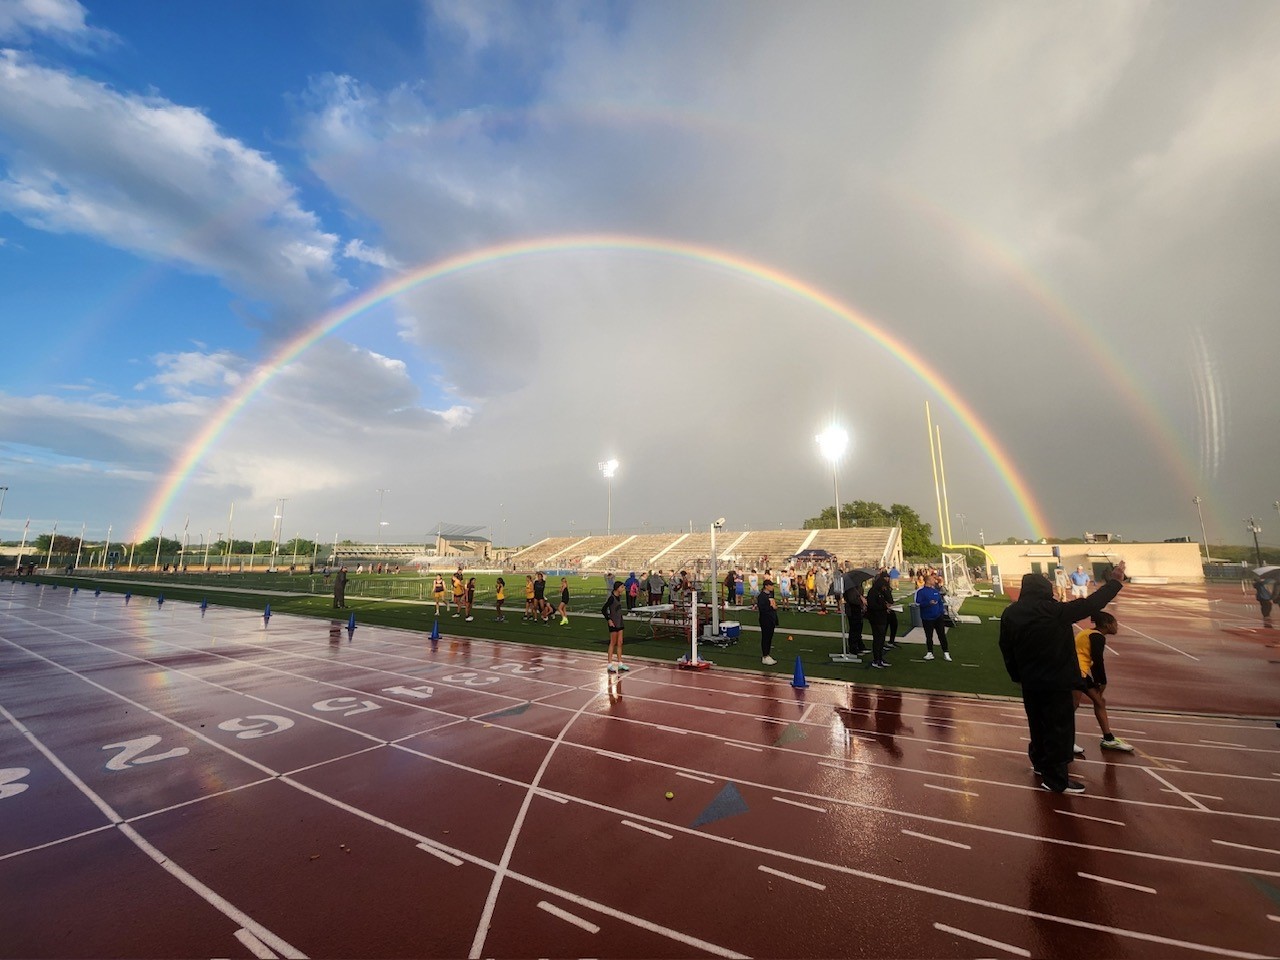 A double rainbow extended all the way across the sky over the Meet of Champions